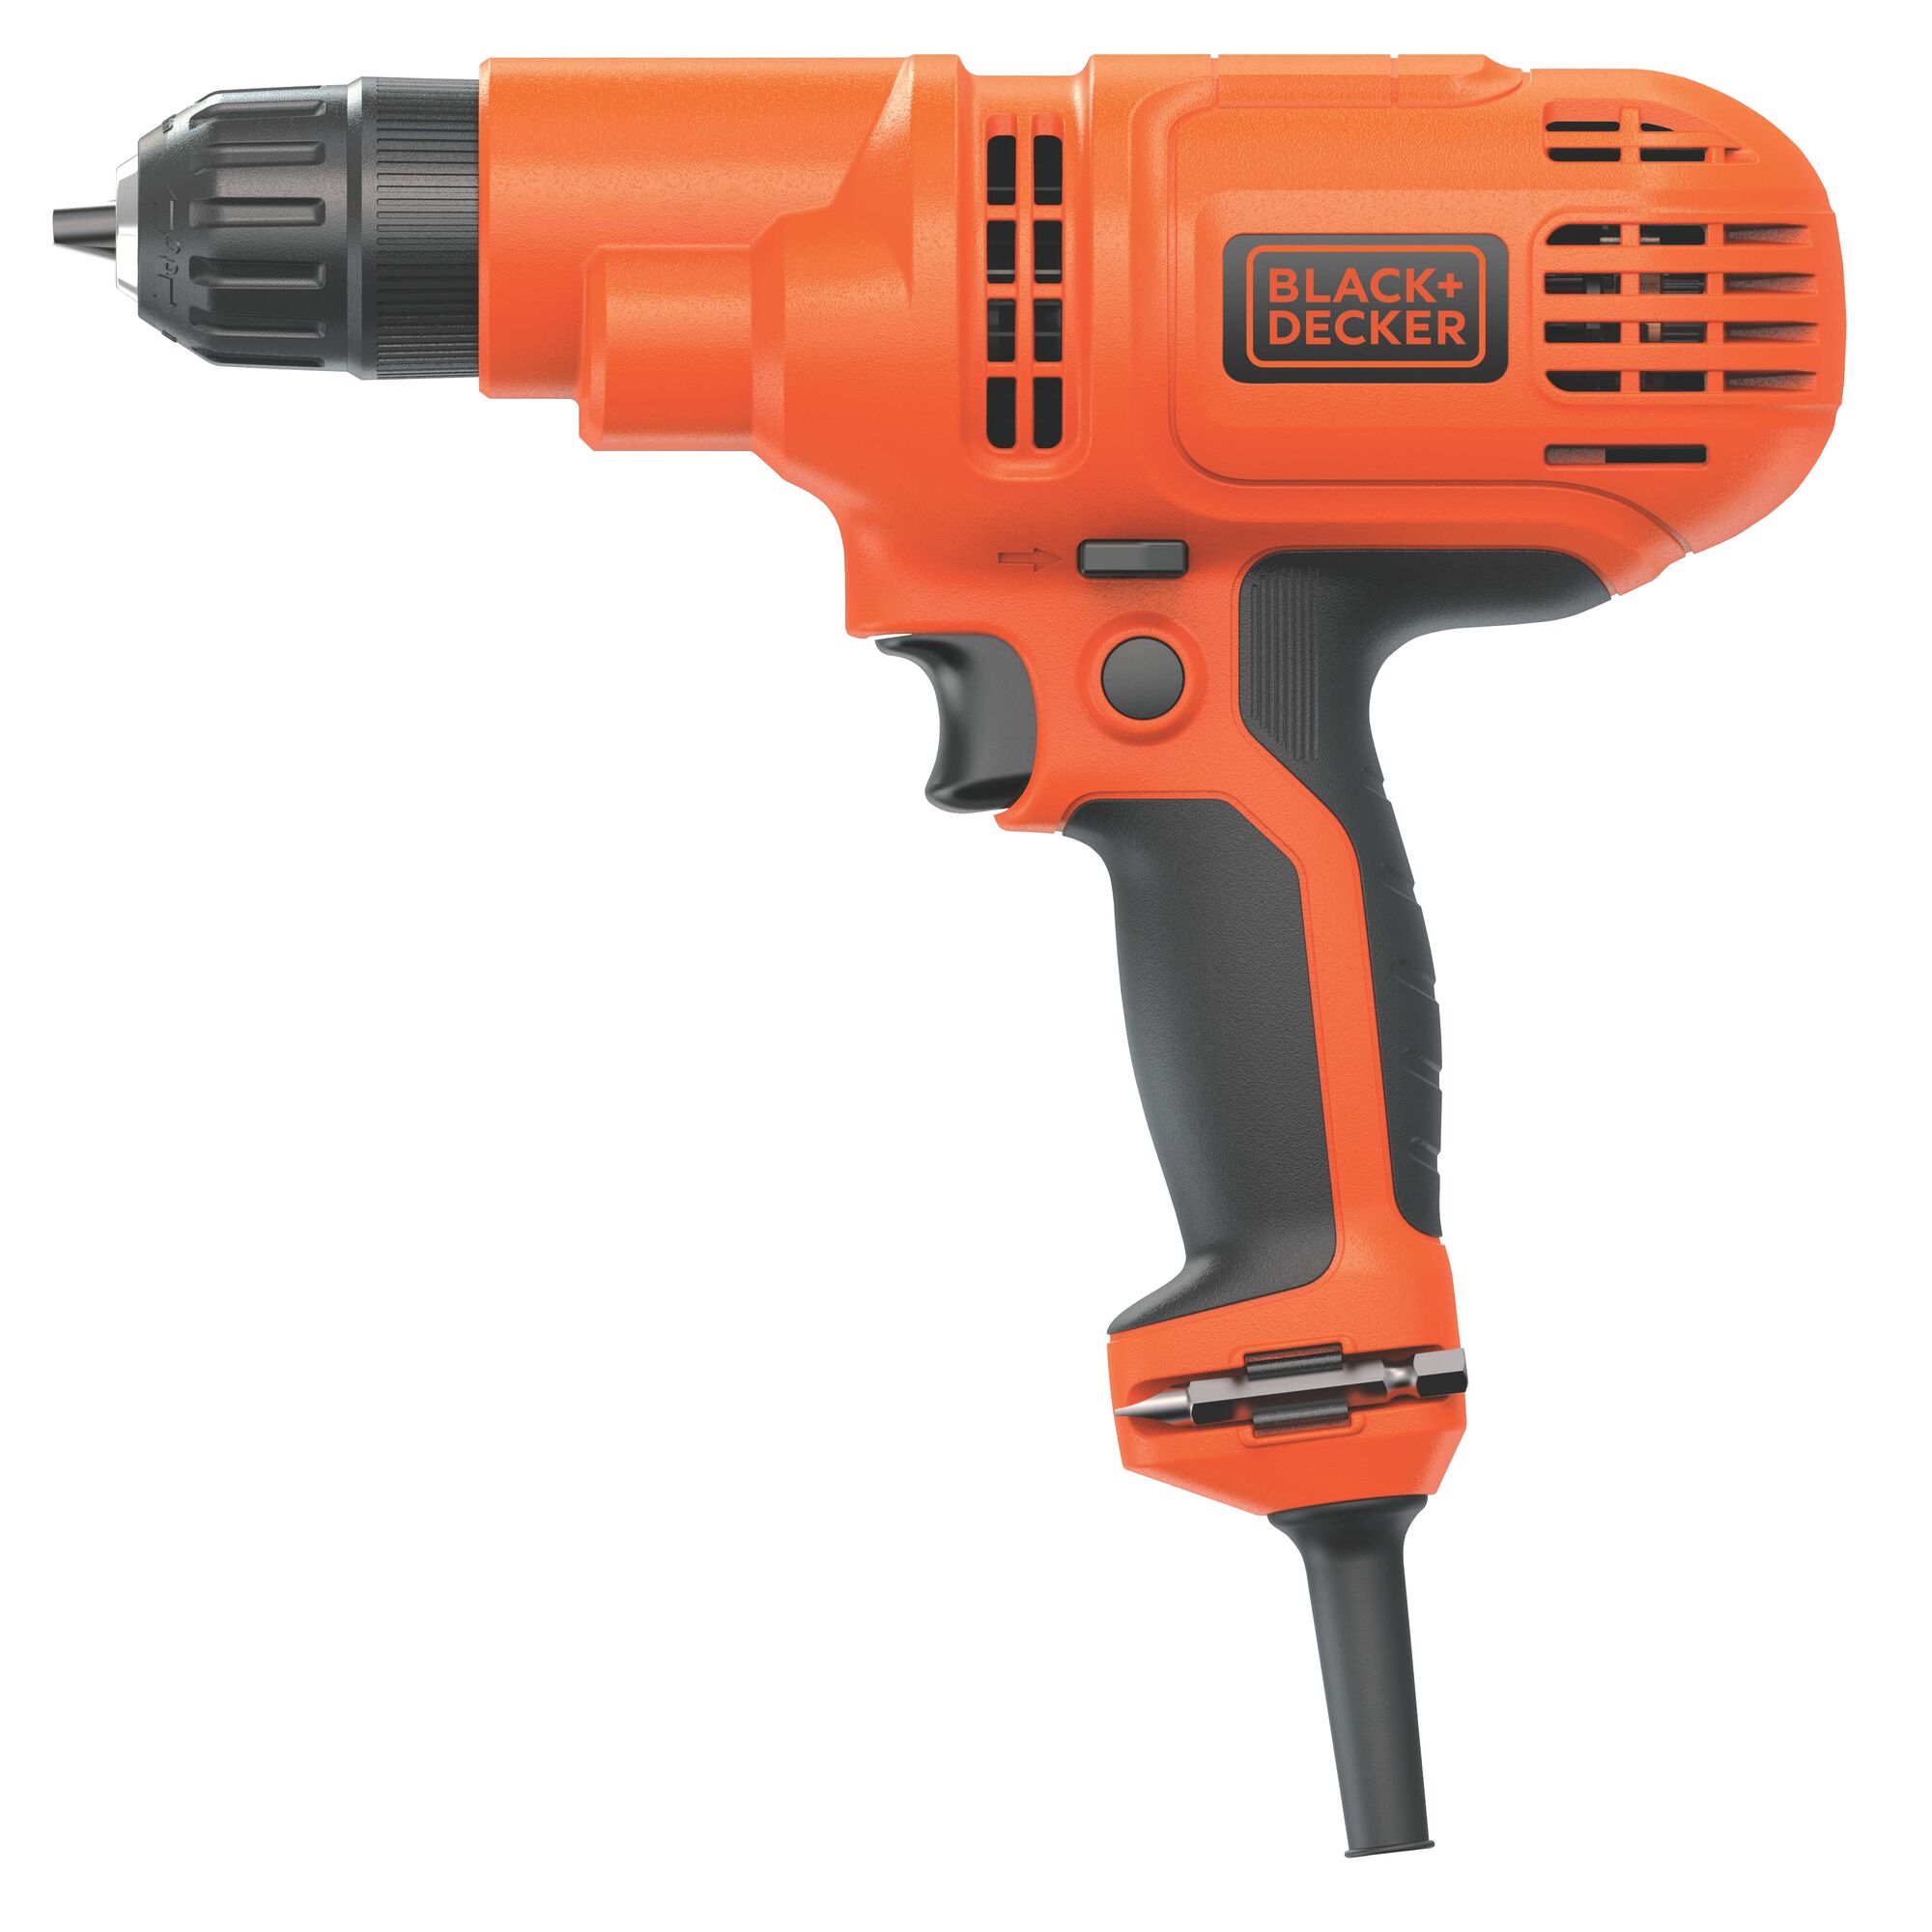 5.5 Amp 3 eighths of an inch Drill Driver.